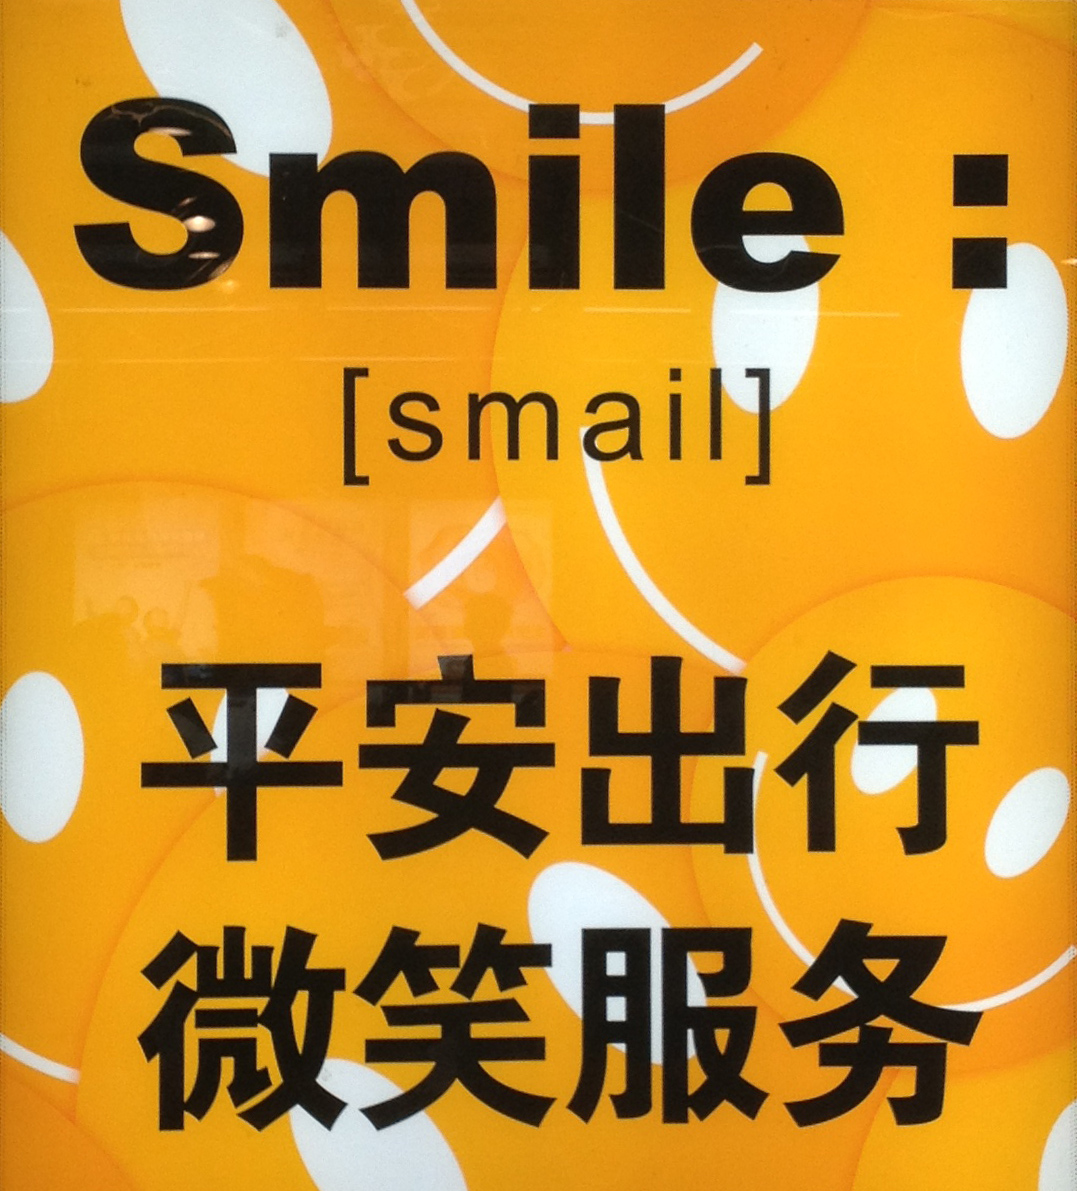 A sign with the word "Smile" written in a variety of ways